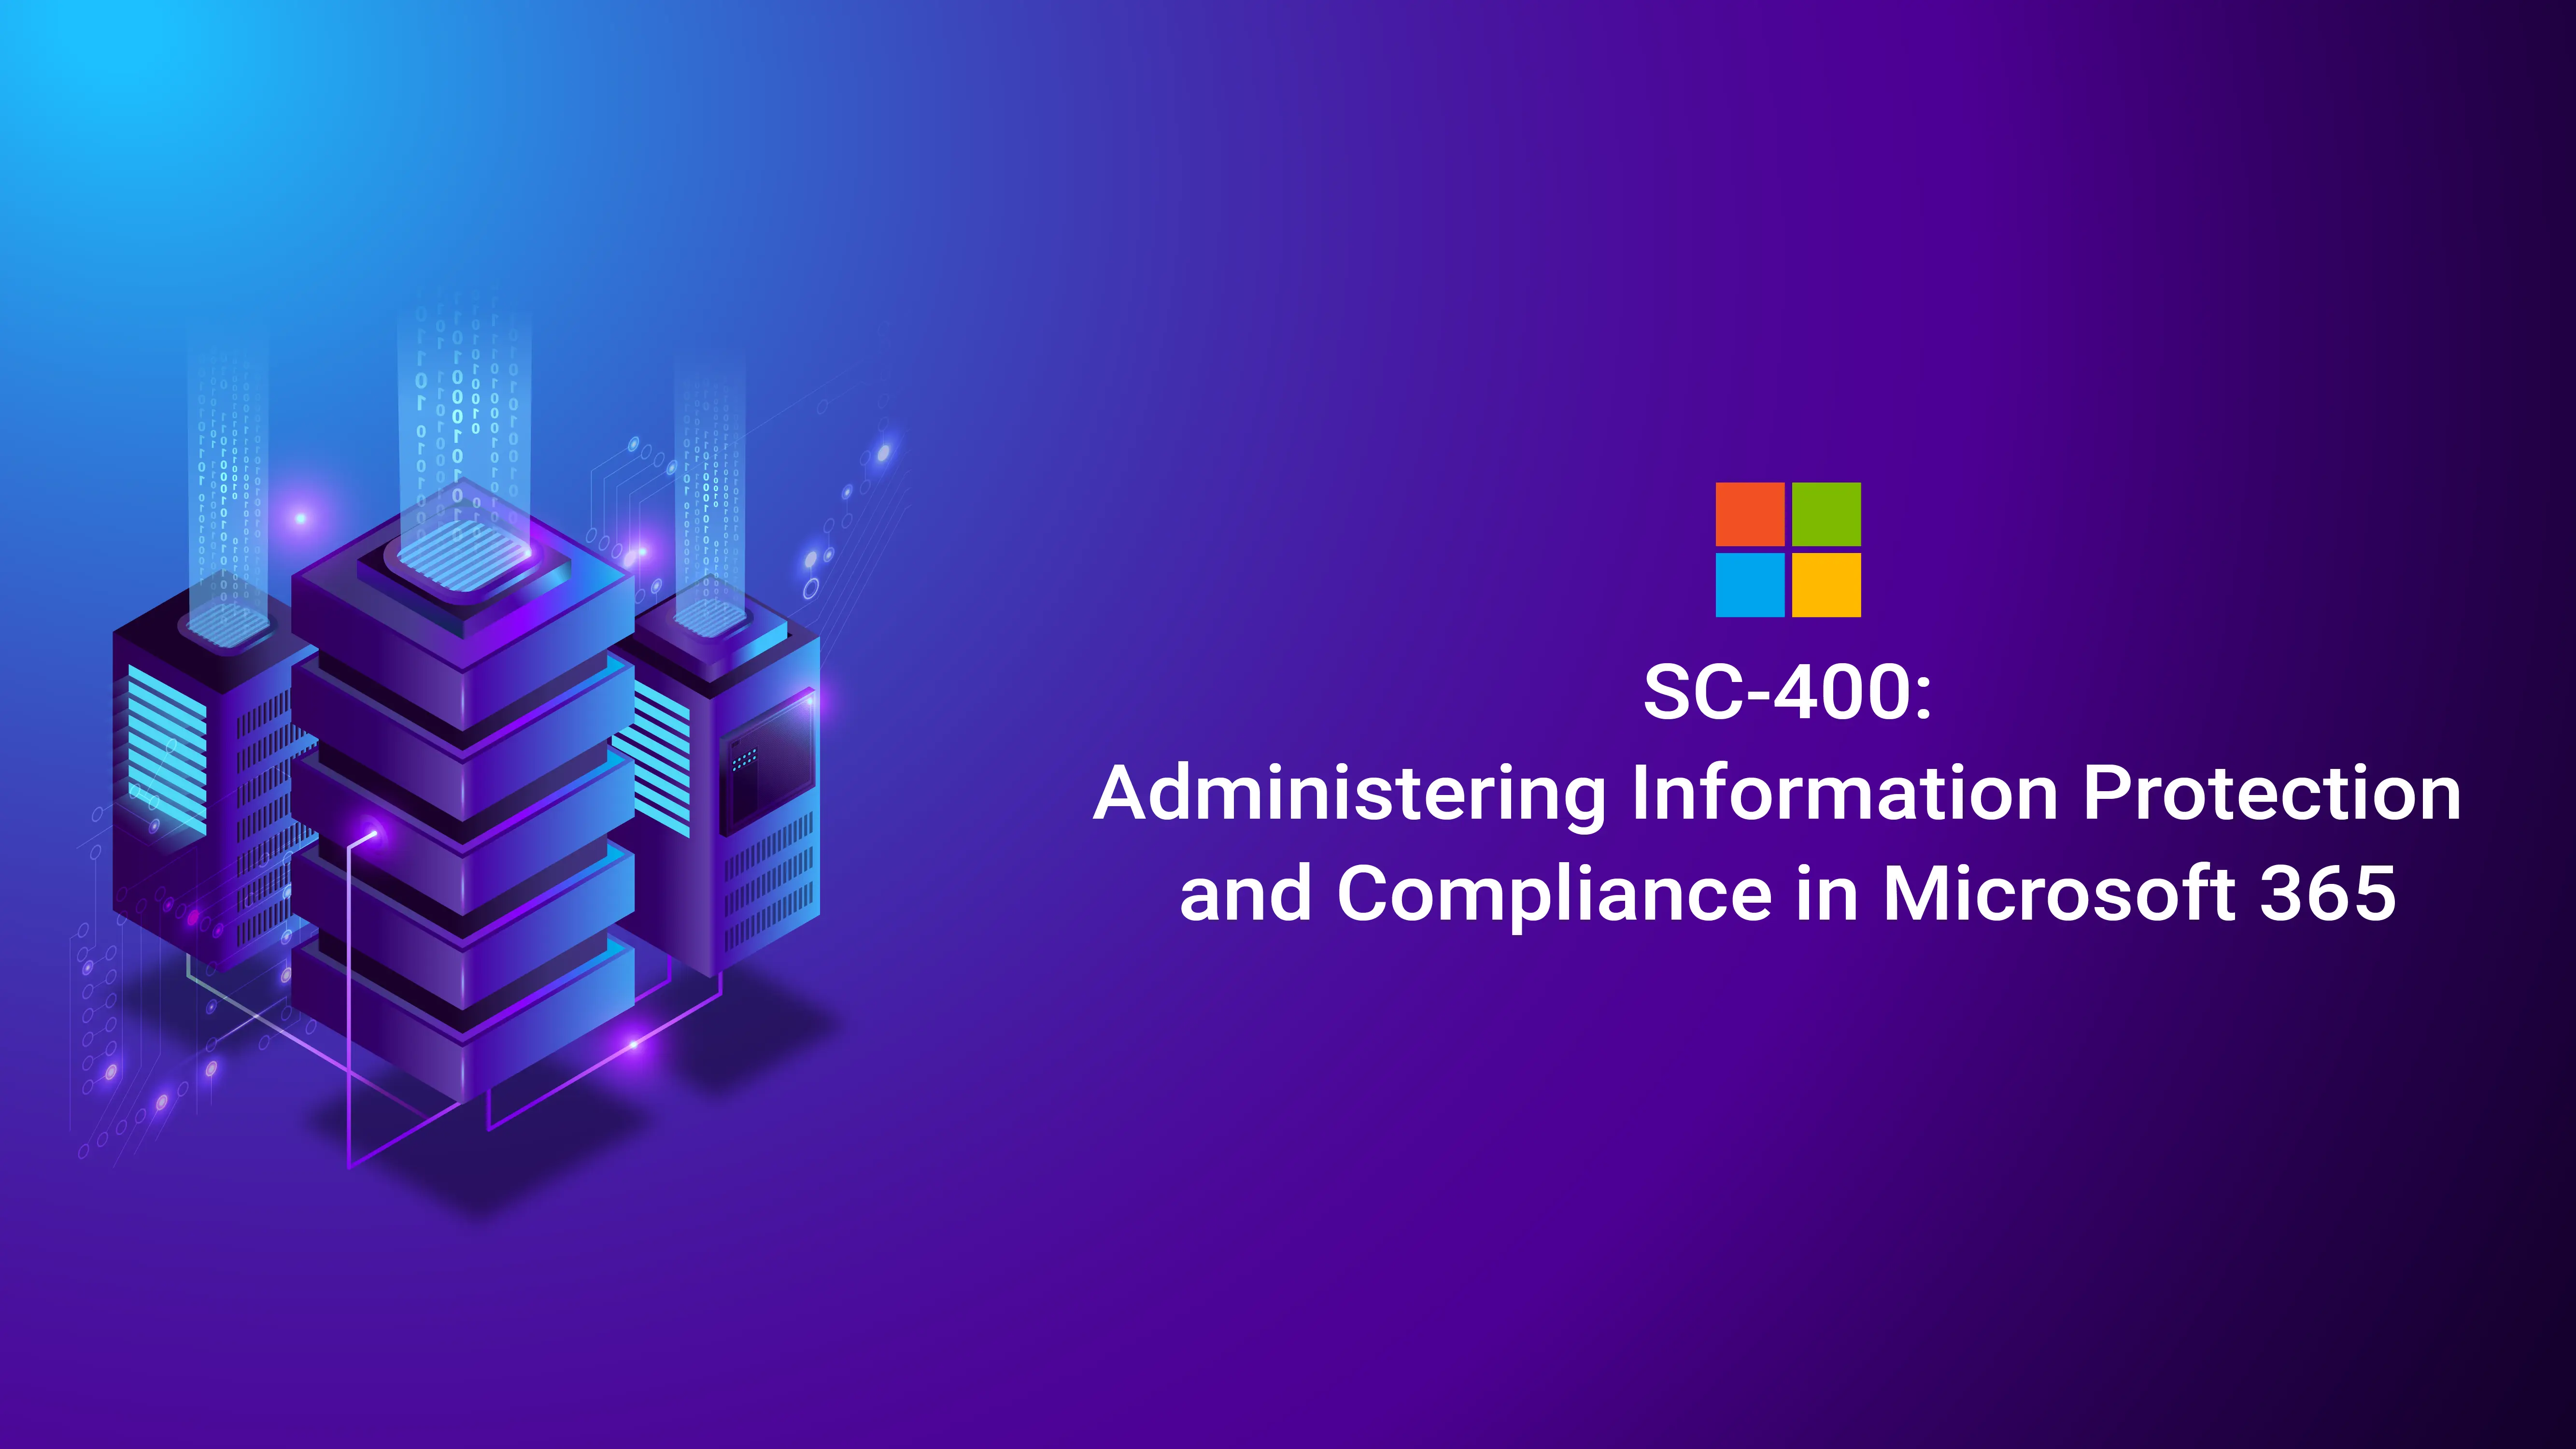 Practice Test SC-400 Microsoft Information Protection Administrator